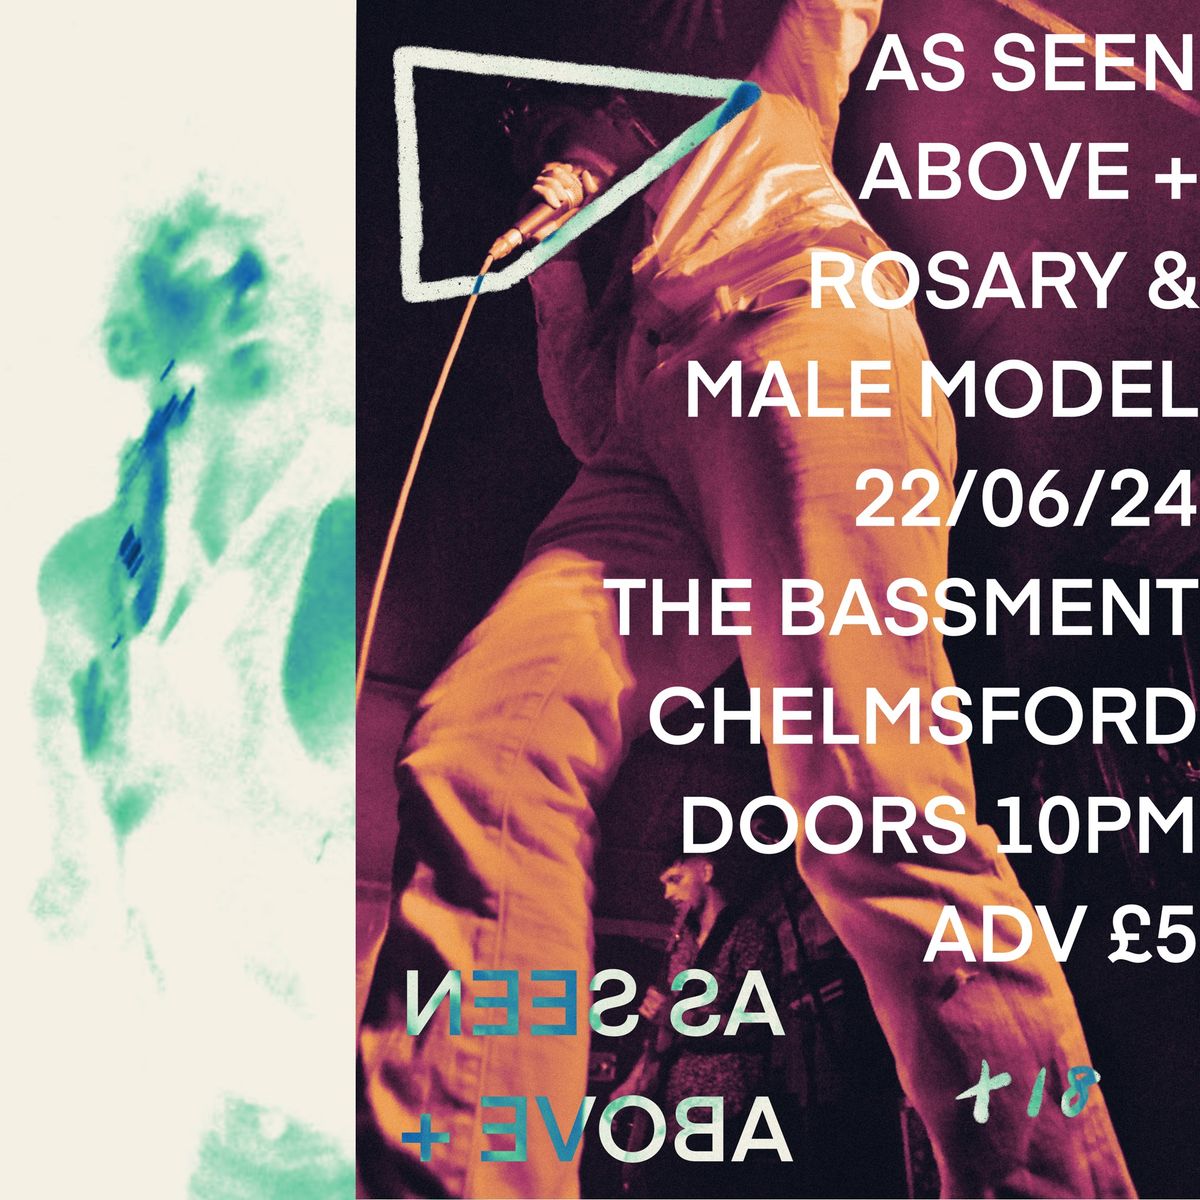 AS SEEN ABOVE + ROSARY + MALE MODEL | BASSMENT | CHELMSFORD 